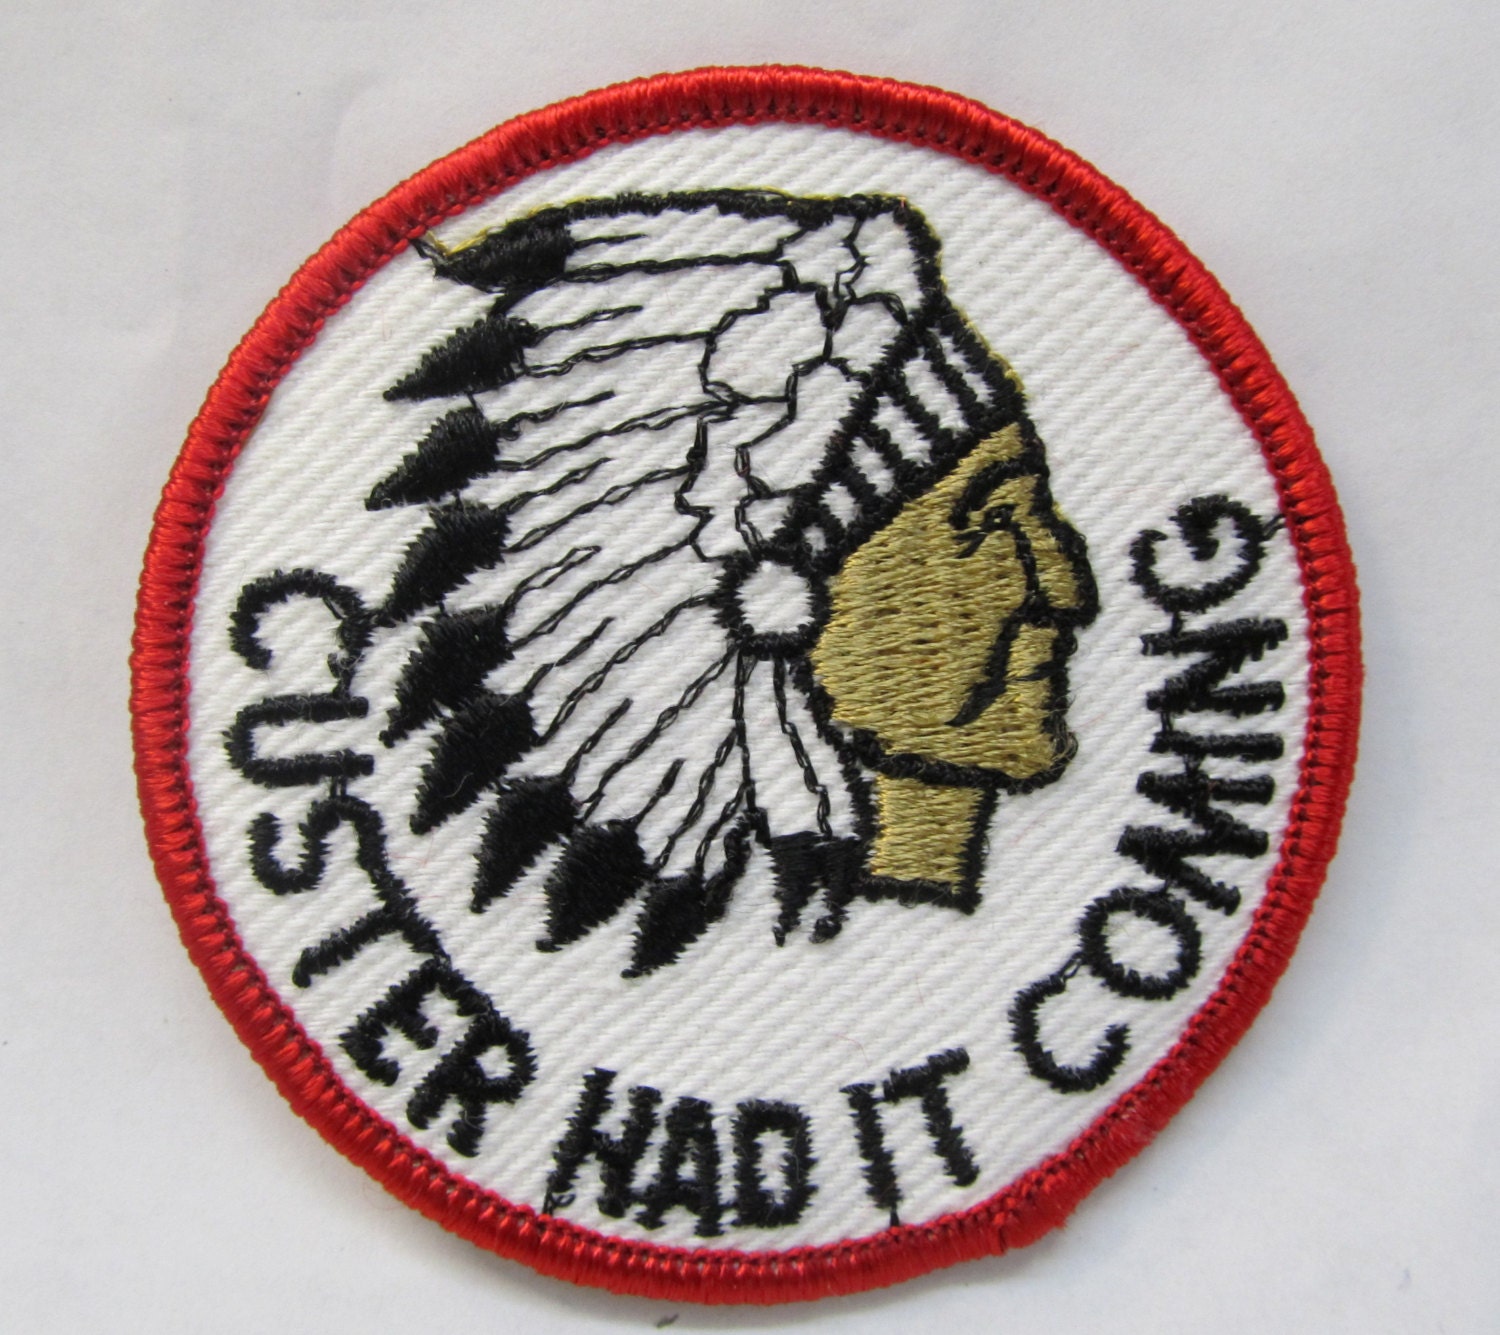 CUSTER HAD It COMING Indian jacket or shirt patch.